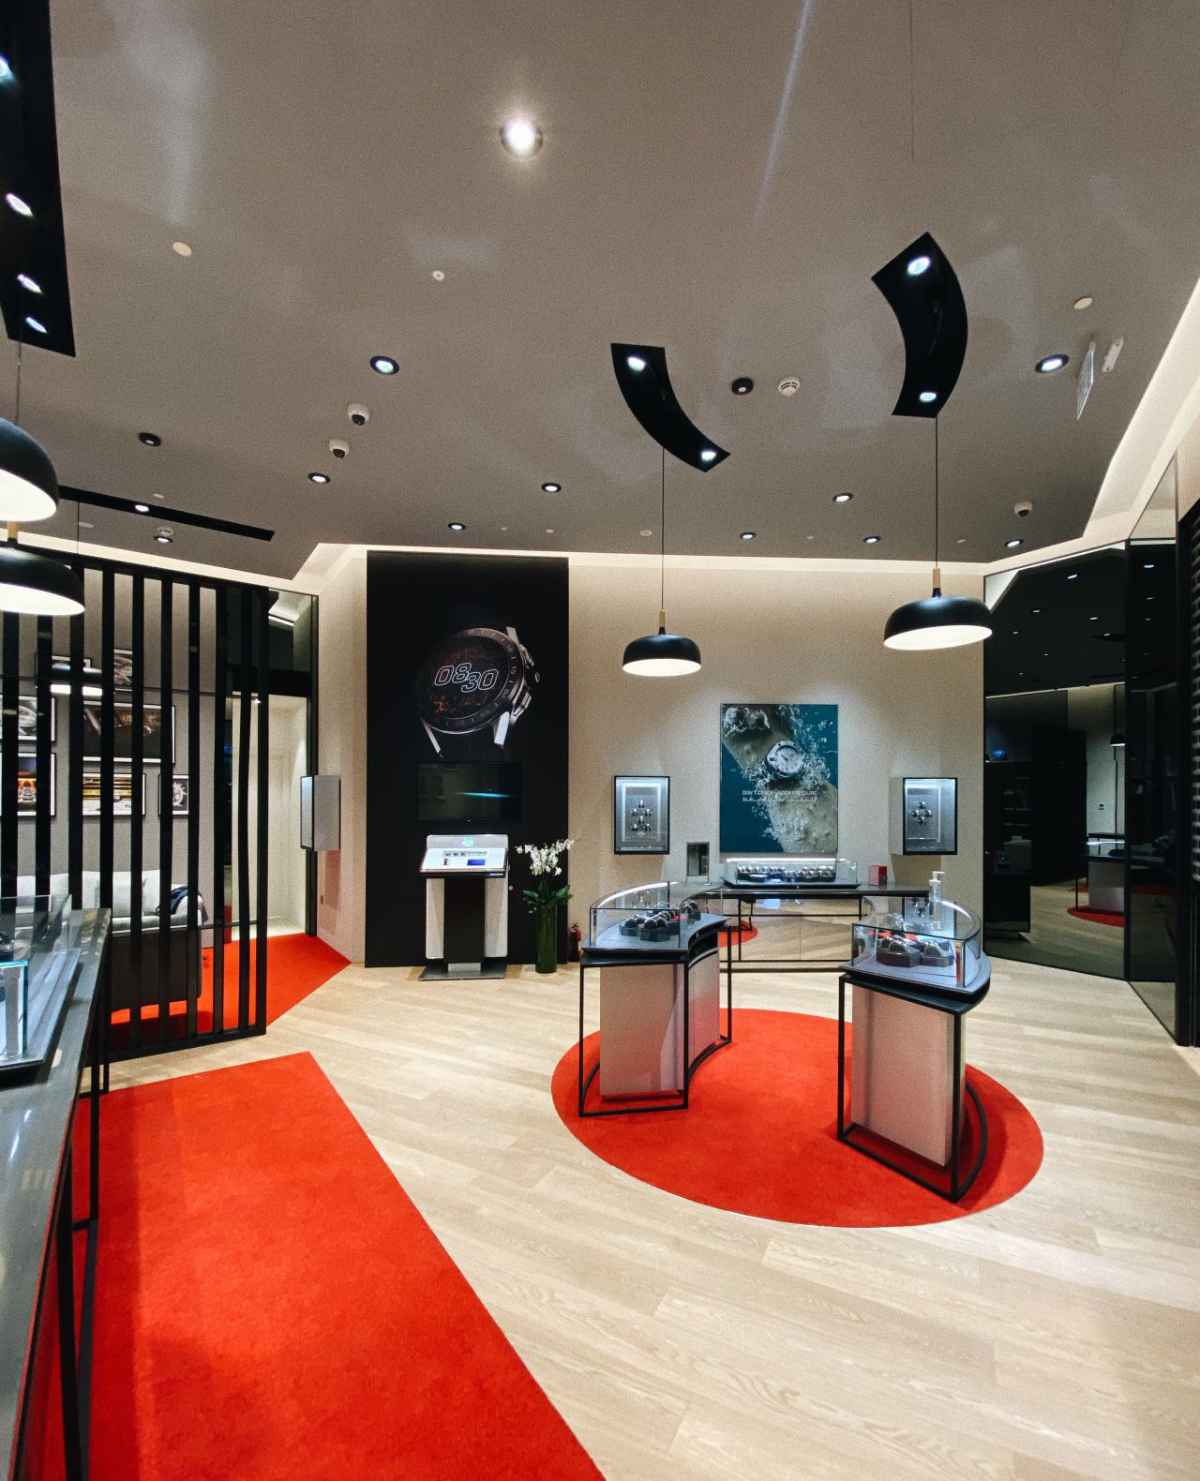 Second TAG Heuer boutique officially opened in 360 Mall, Kuwait City